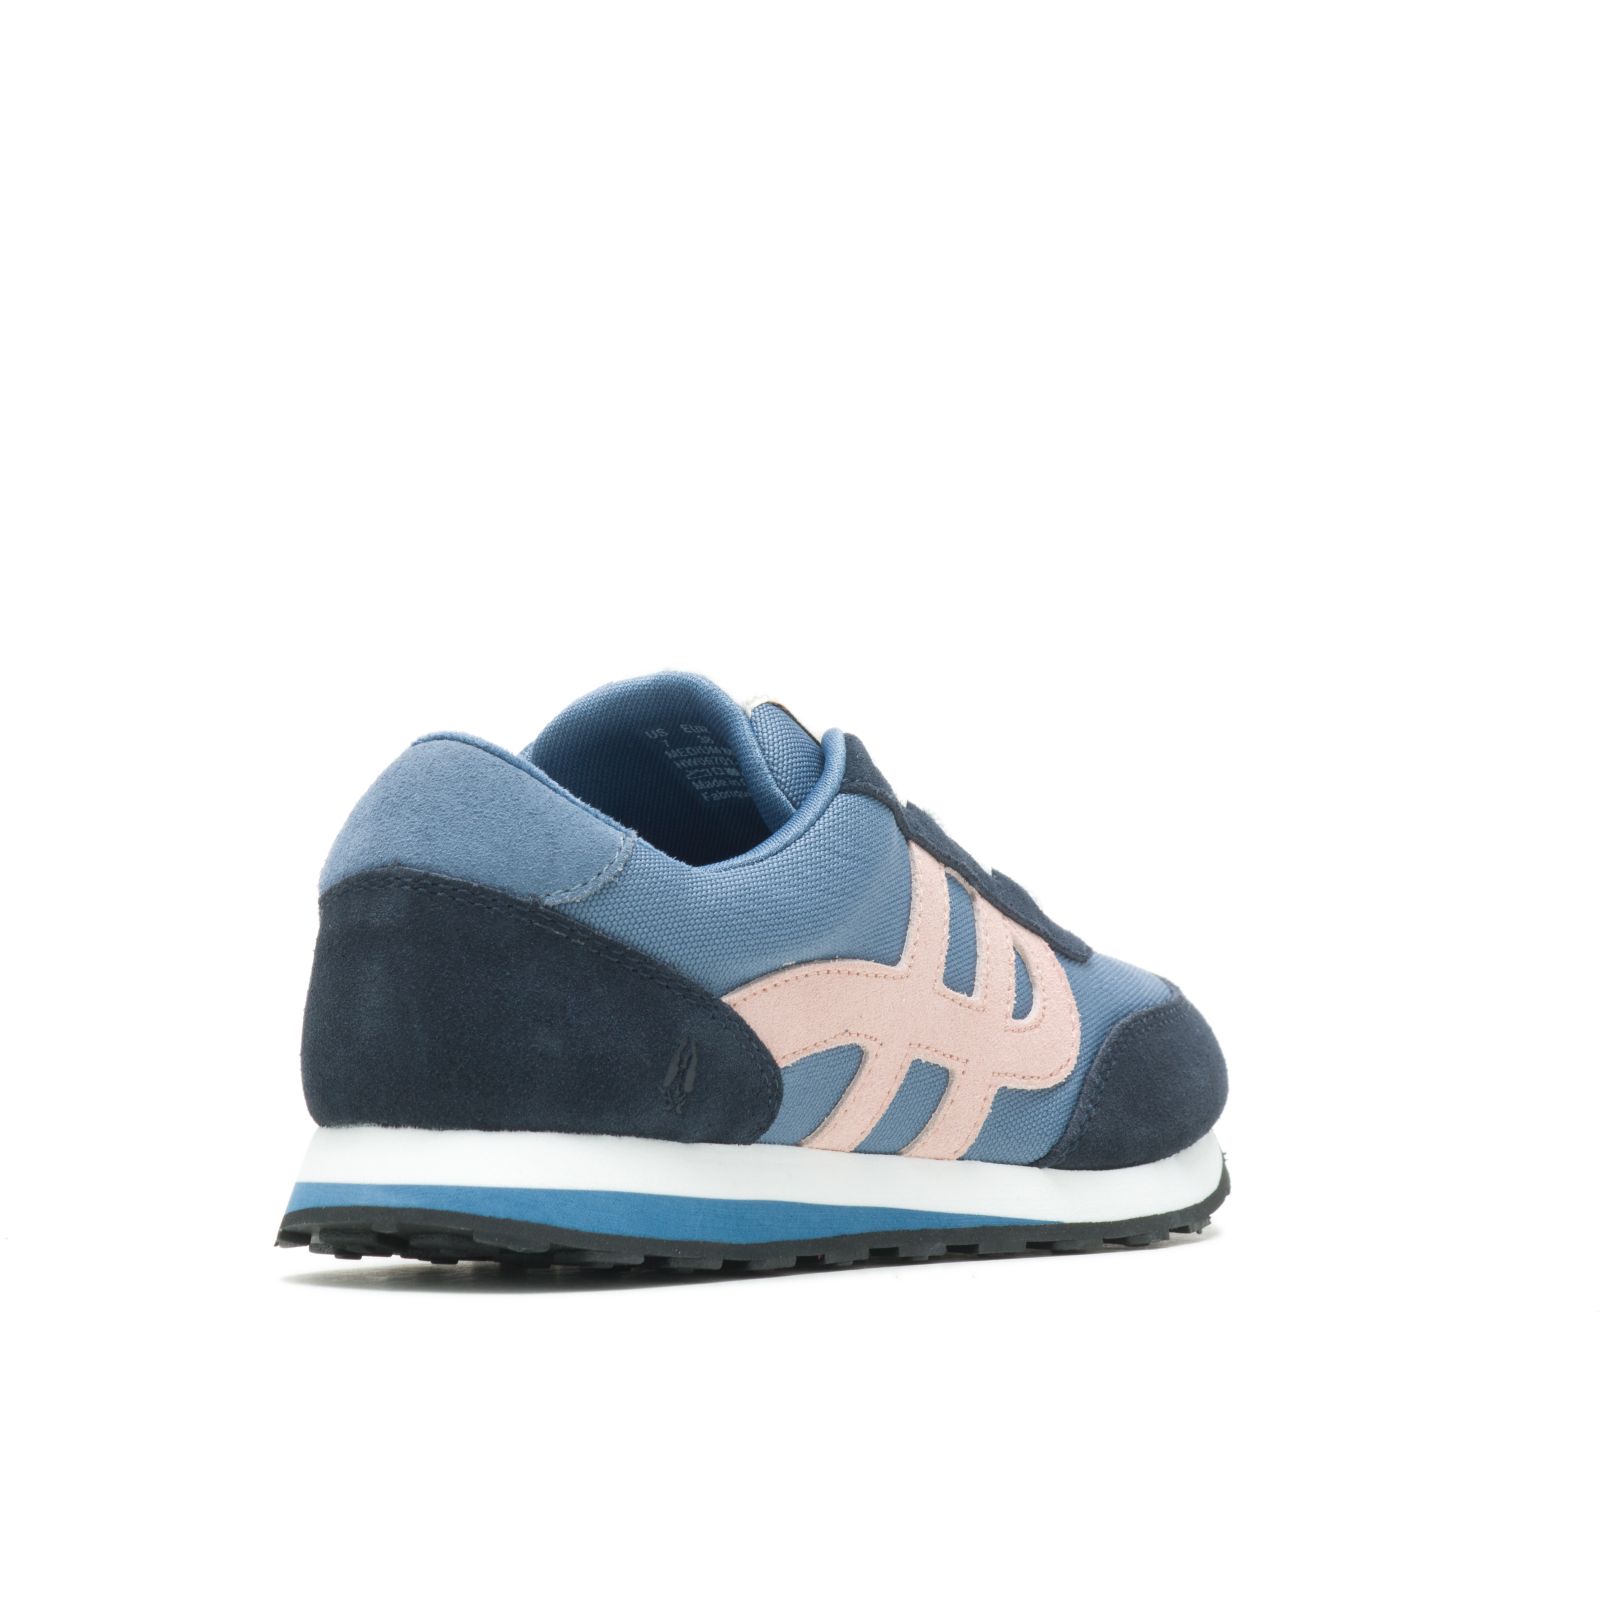 Tenis Hush Puppies Seventy8 Mujer Cool Blues Suede | ZKQPJOR-06